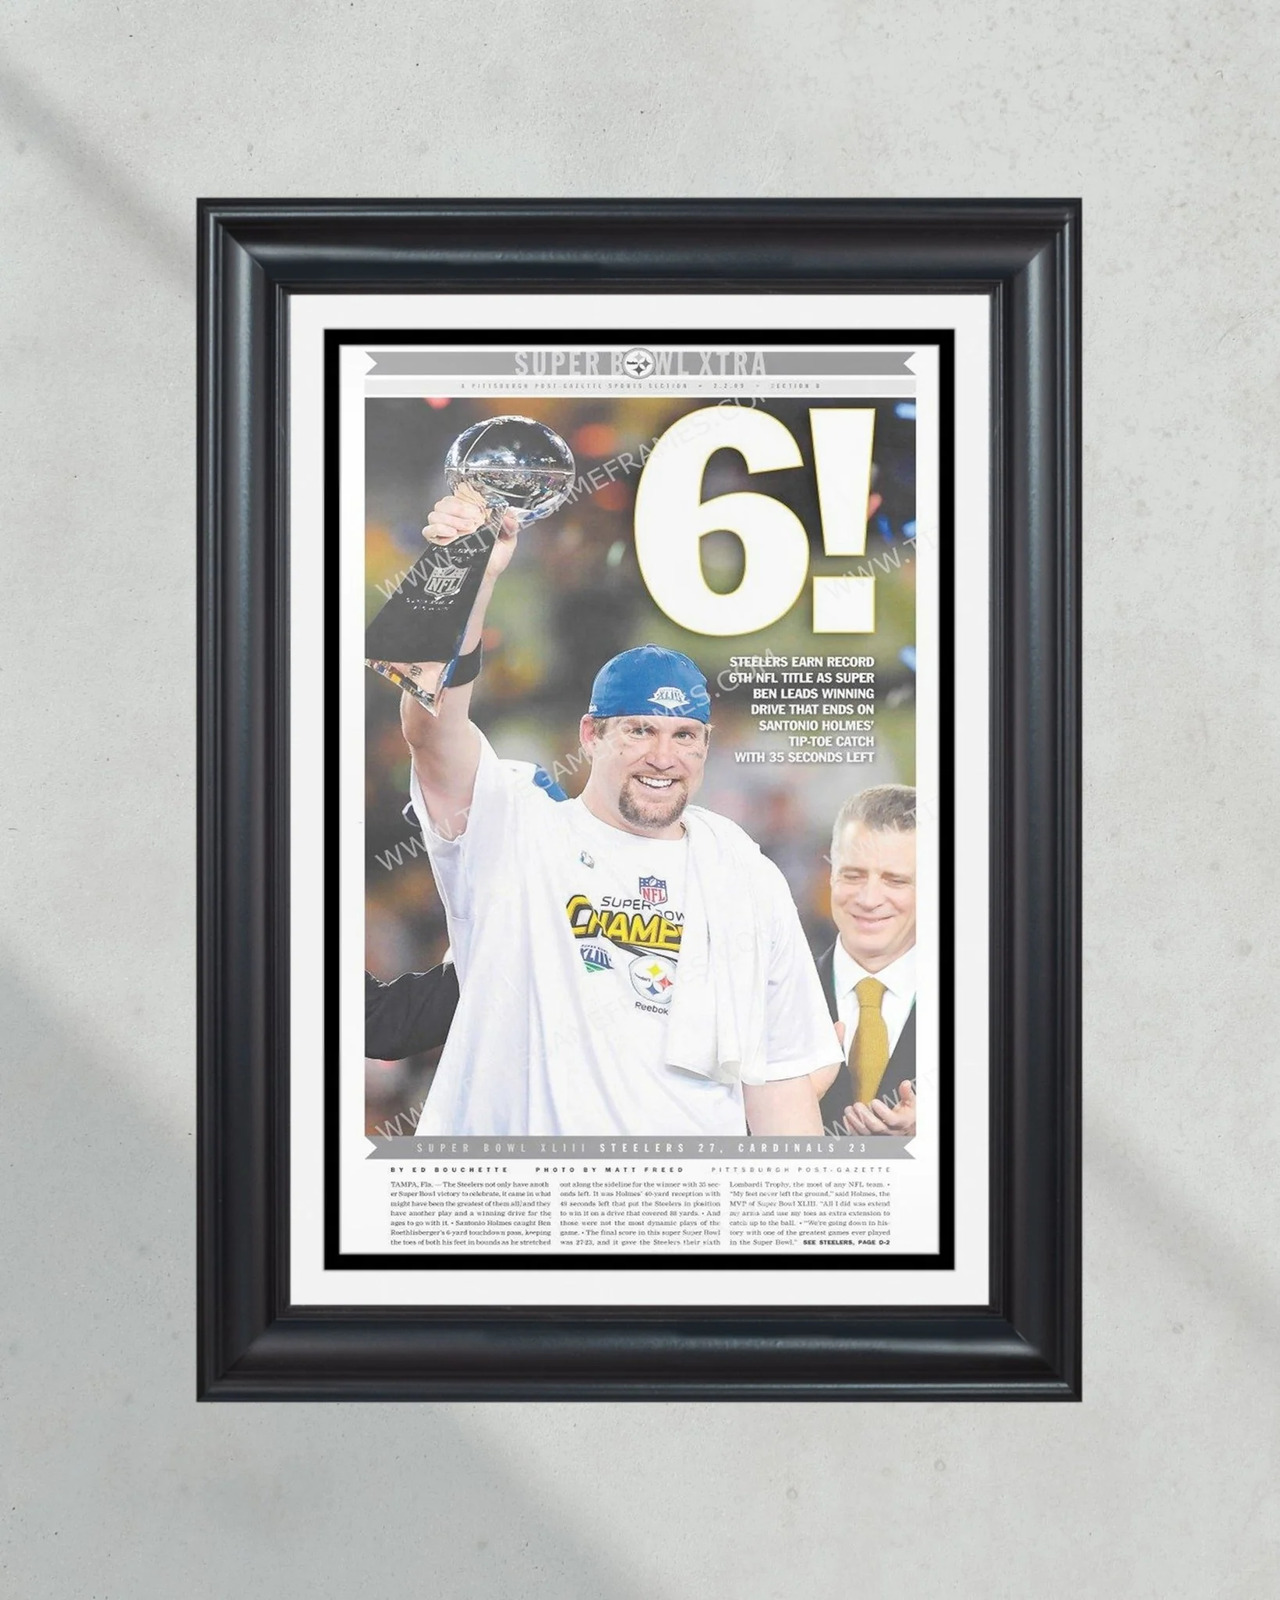 2009 Pittsburgh Steelers “6” Super Bowl Champions Framed Front Page Newspaper Pr